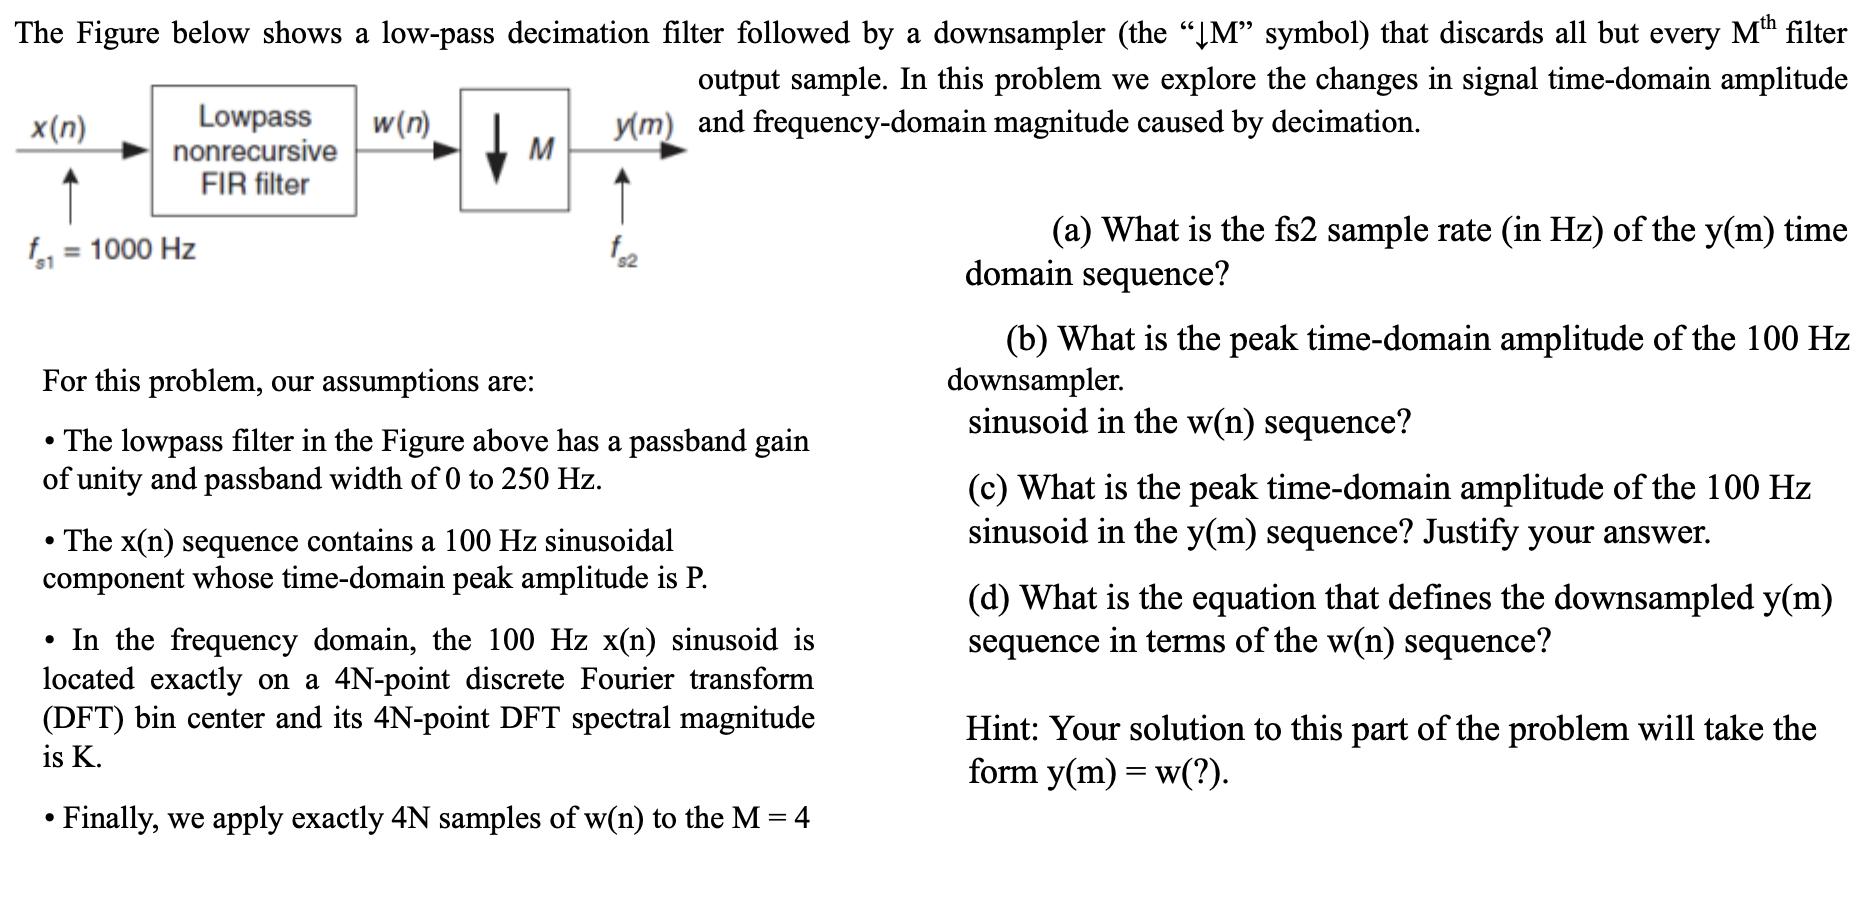 The Figure below shows a low-pass decimation filter followed by a downsampler (the 